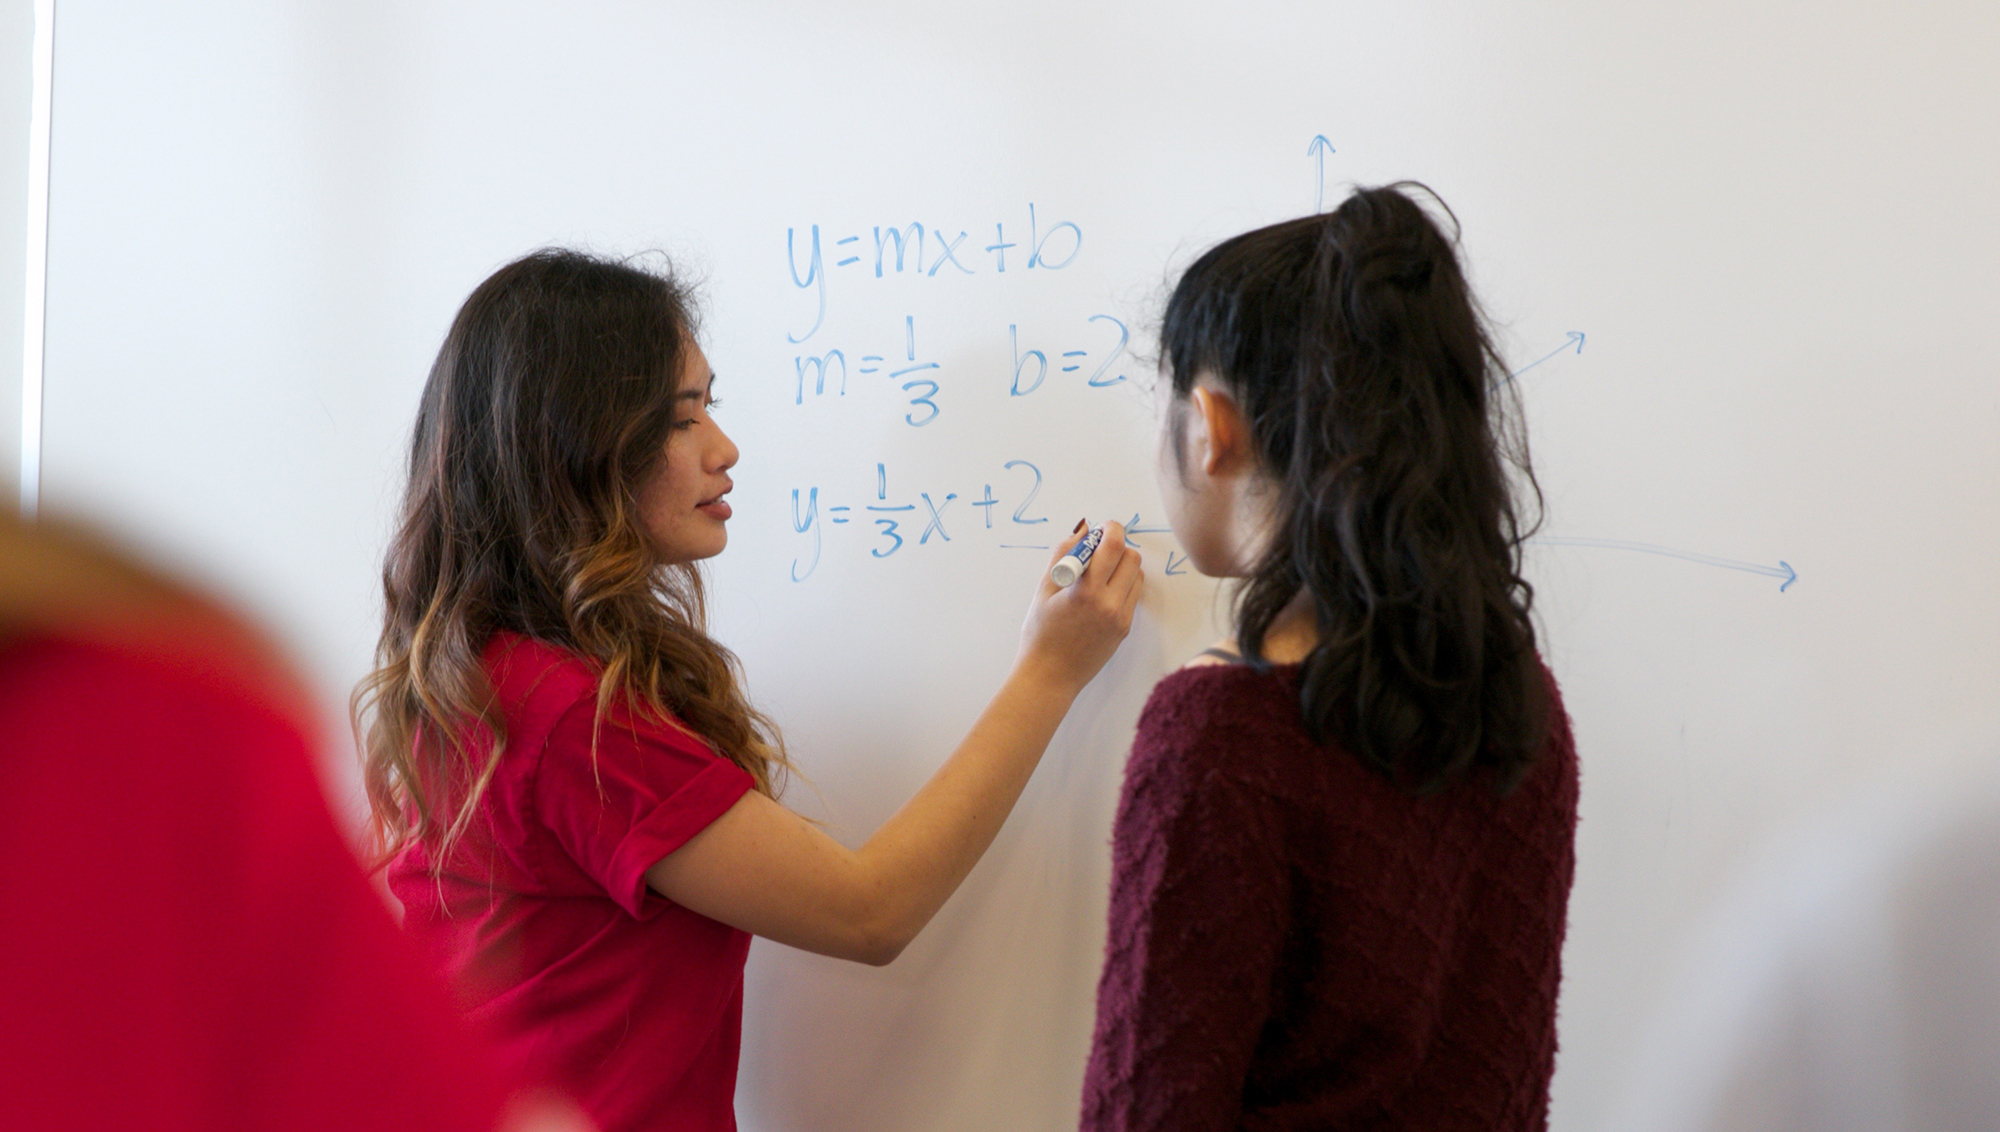 A tutor helping a student at a dry erase board with a math problem.